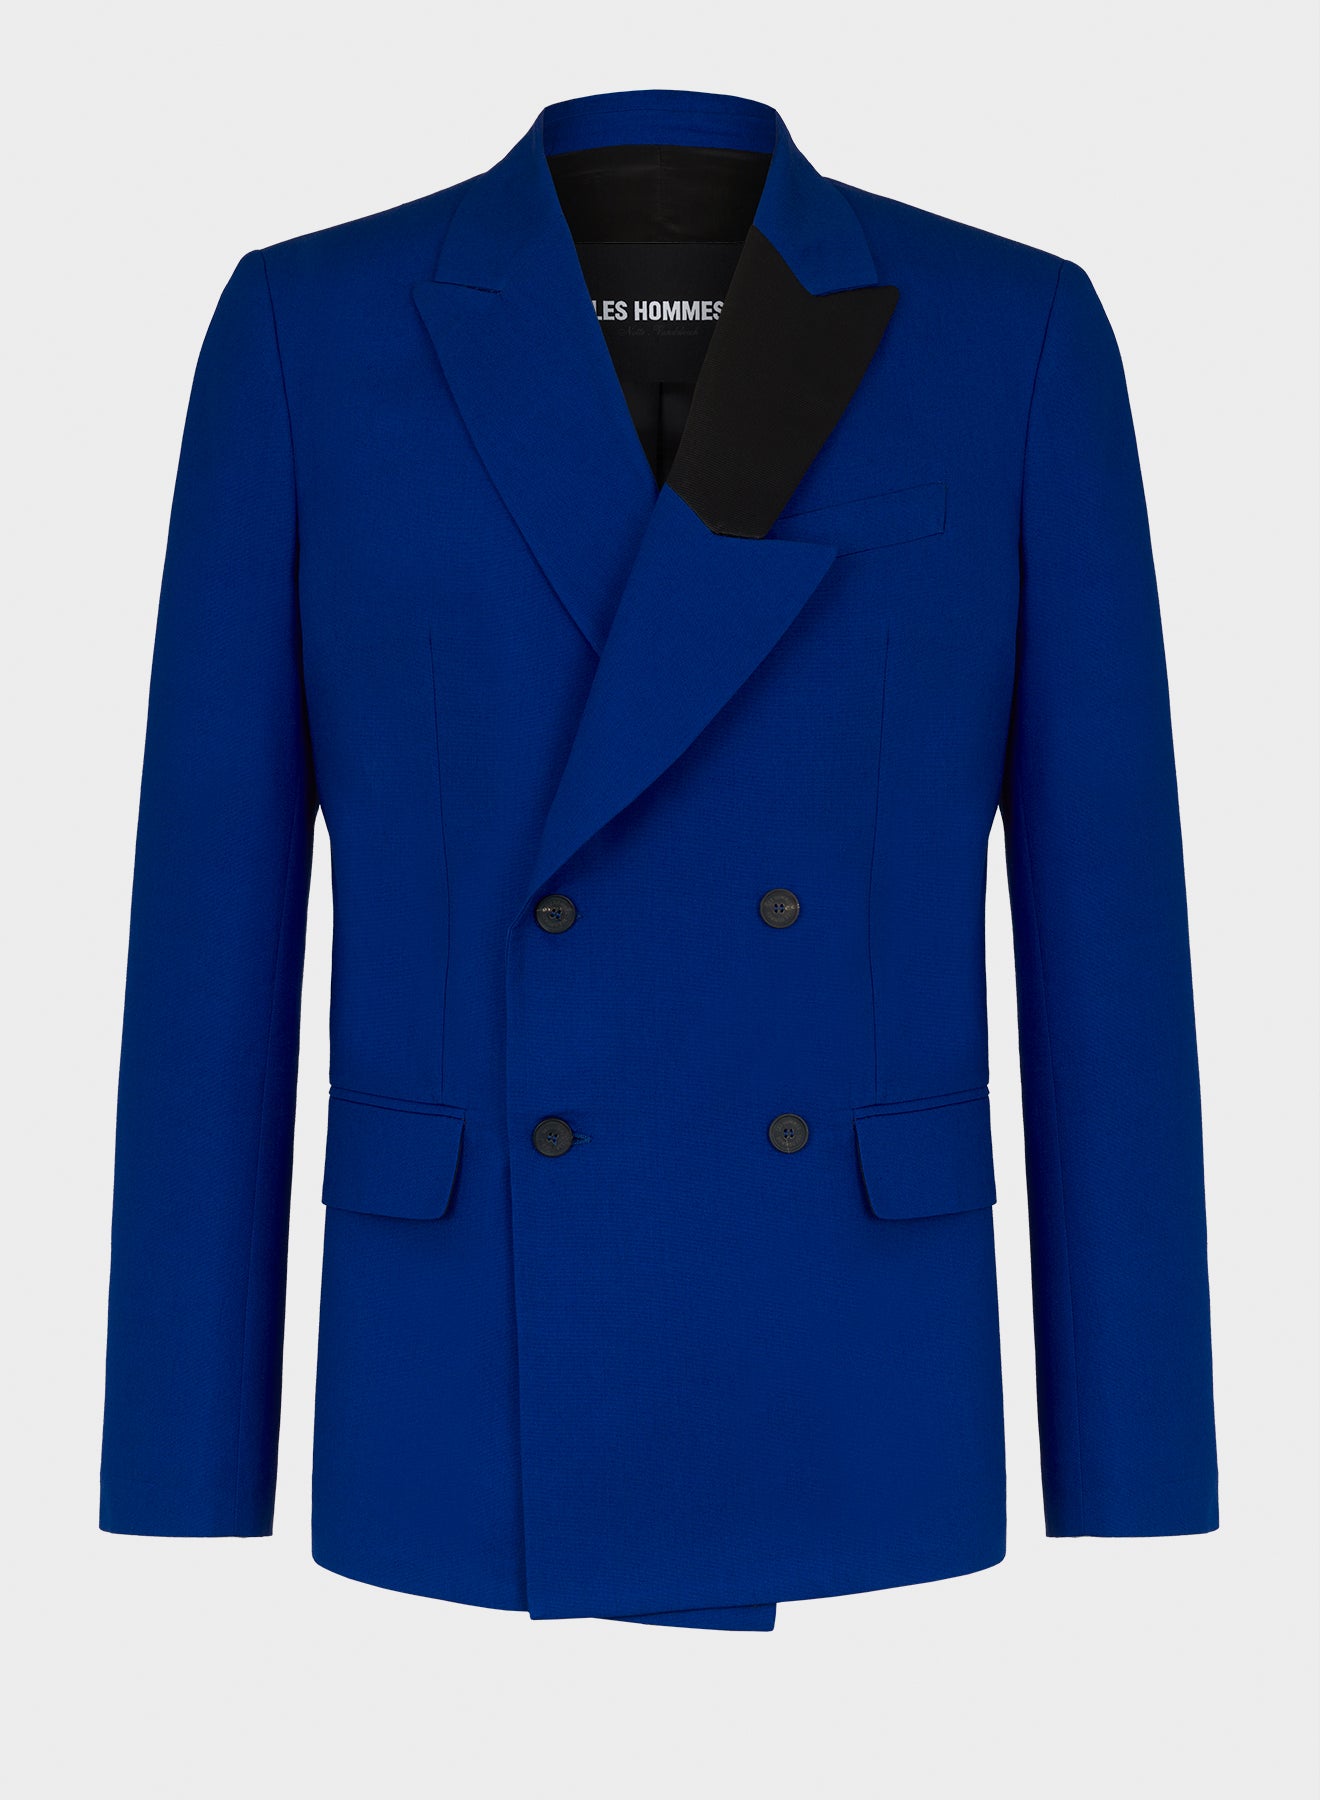 DOUBLE-BREAST AND DOUBLE LAPEL BLAZER